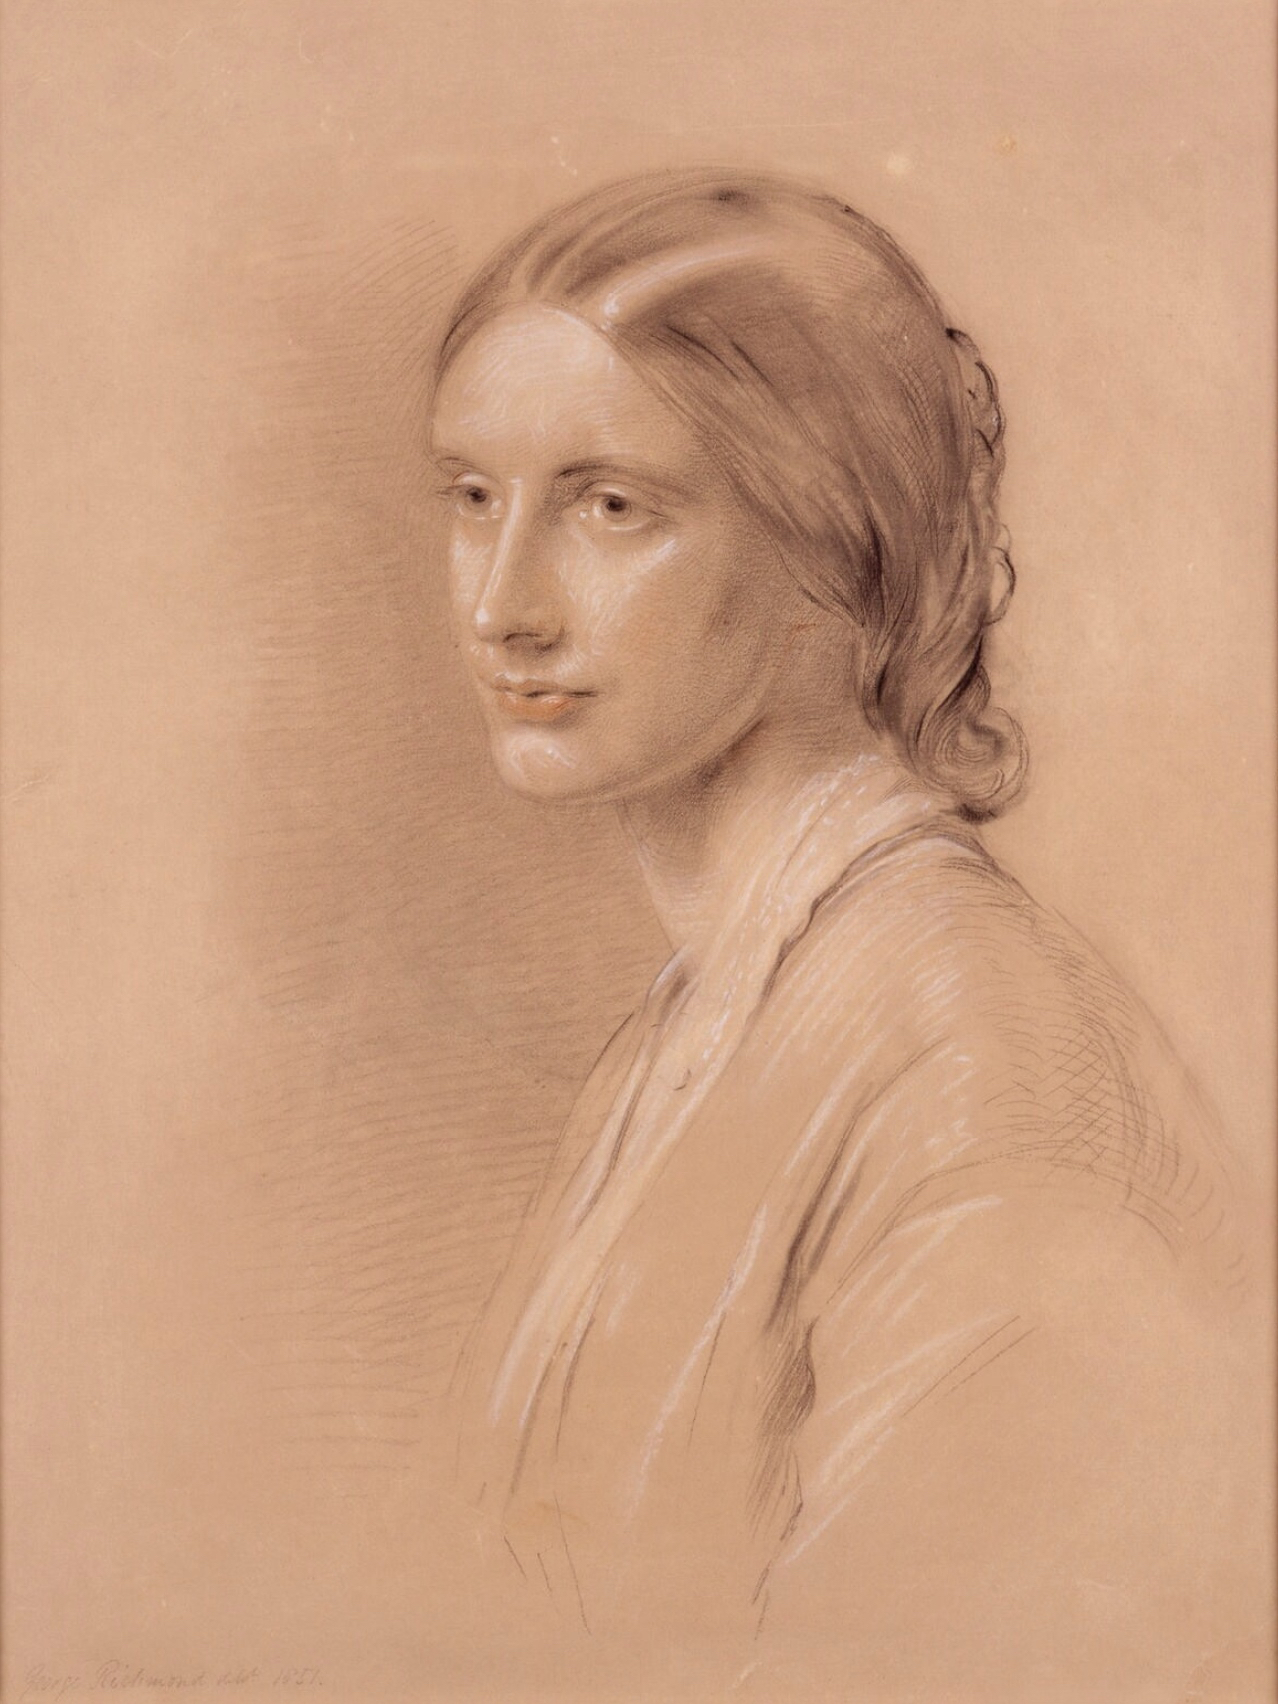 Josephine Butler, who led the campaign against Sir Henry Knight Storks and his ilk